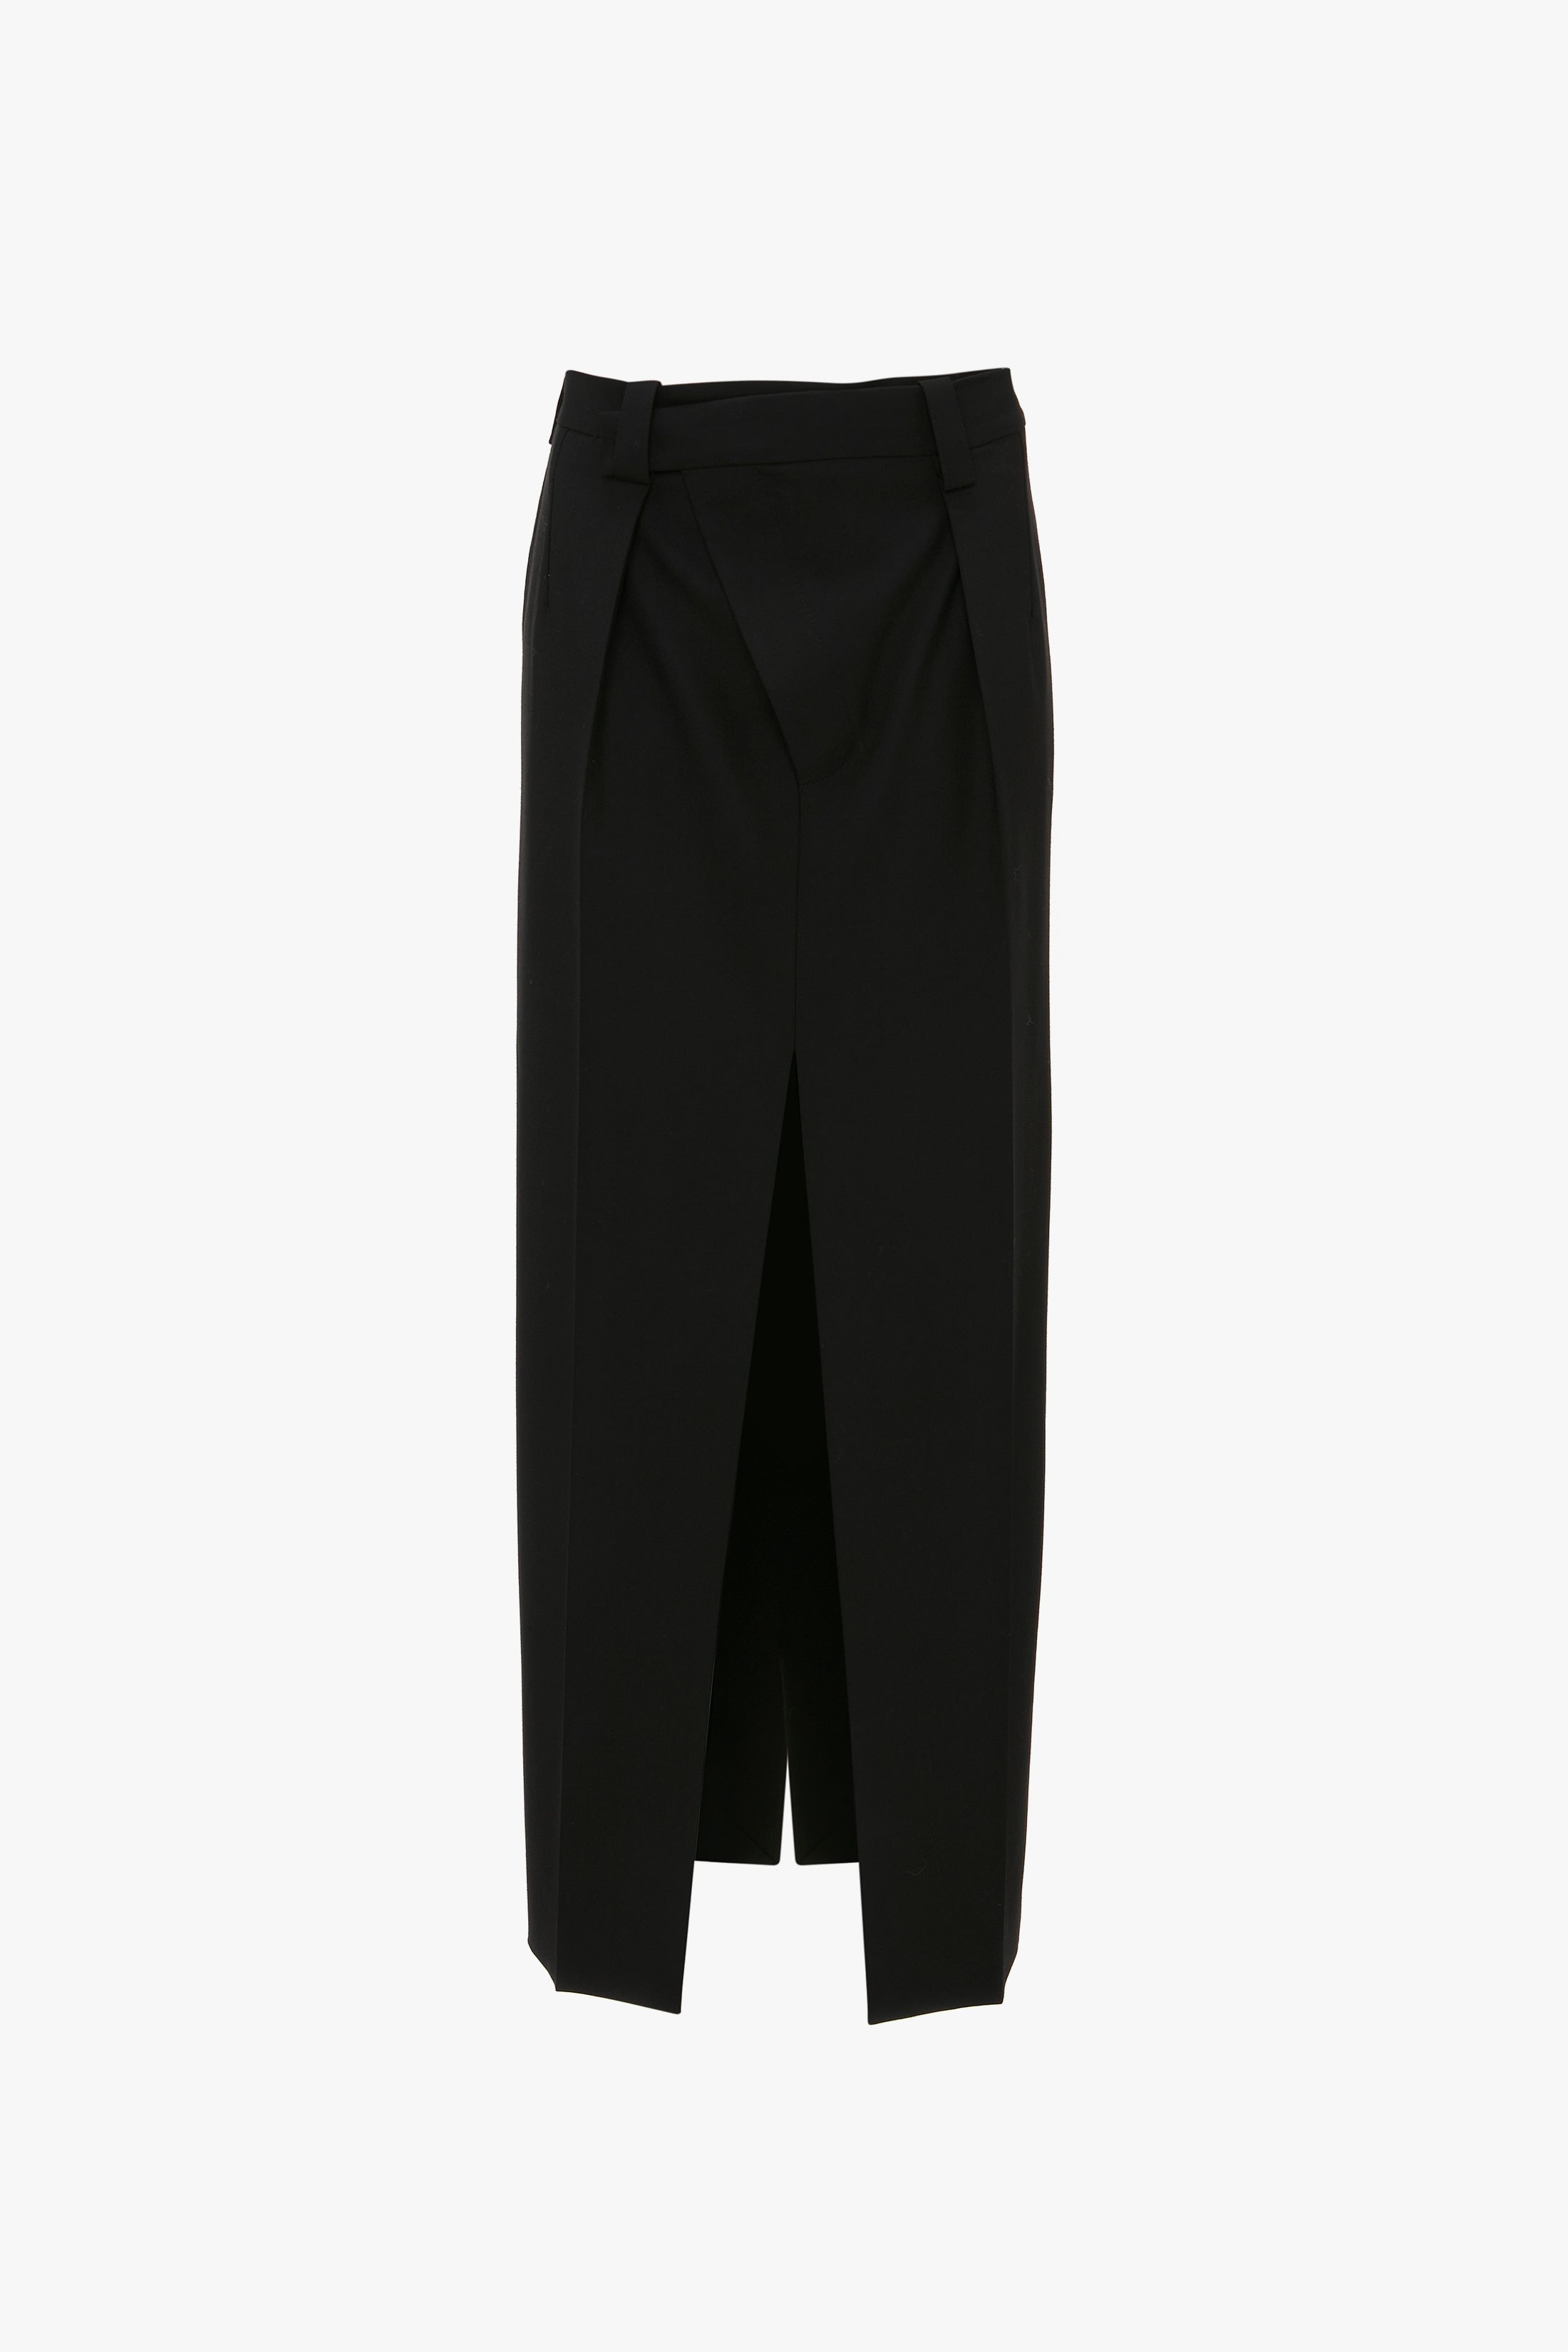 Wrap Front Tailored Skirt In Black - 1